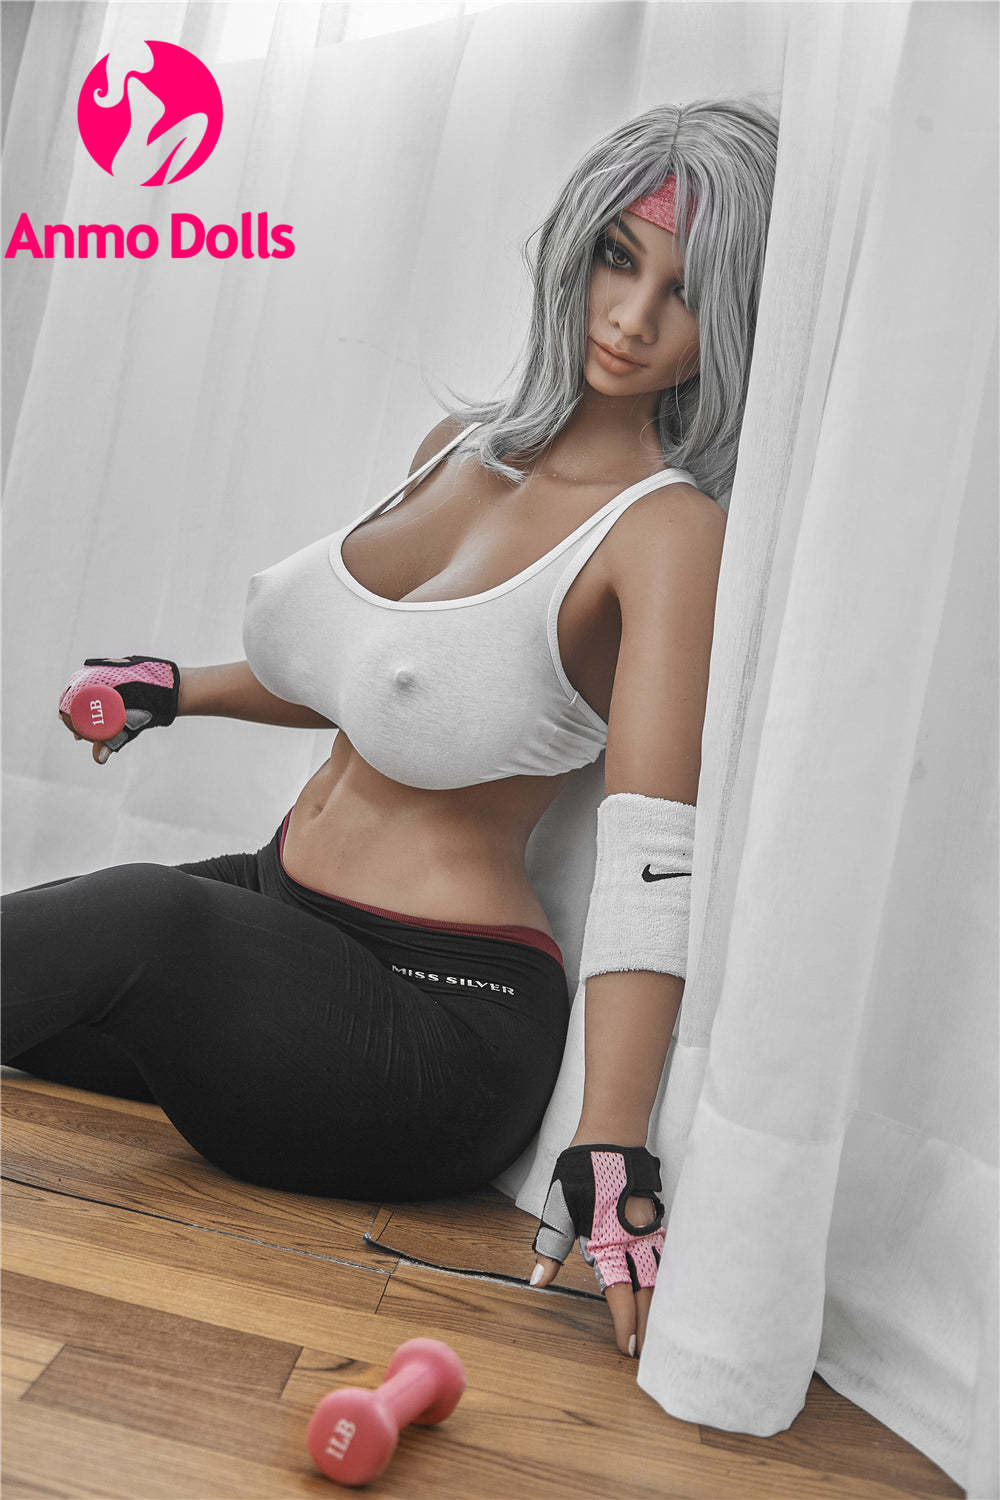 Cian - Big Titted Fit Sex Doll at Gym - Anmodolls by Anmodolls